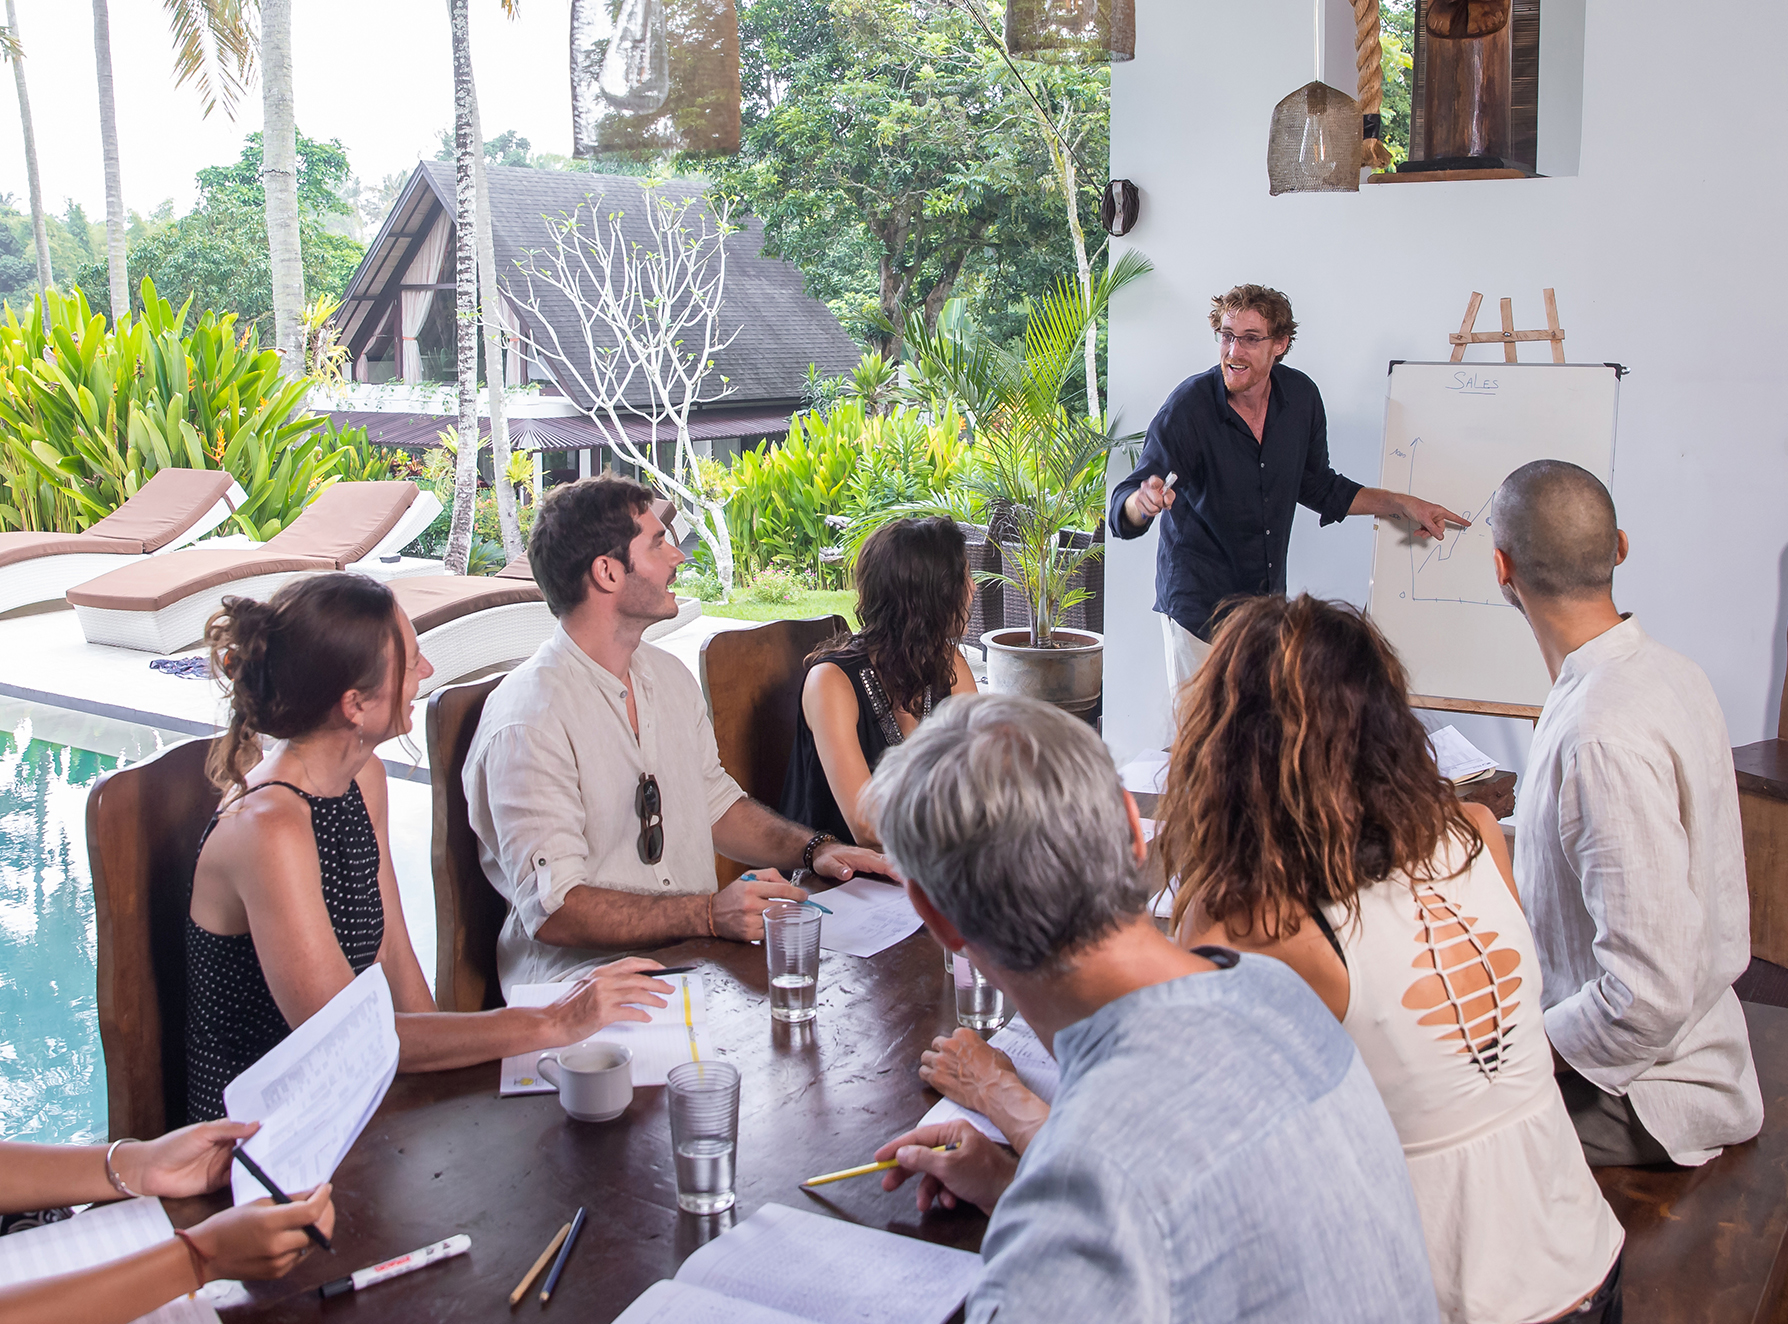 An enthusiastic presenter, leading a corporate meeting at a resort.